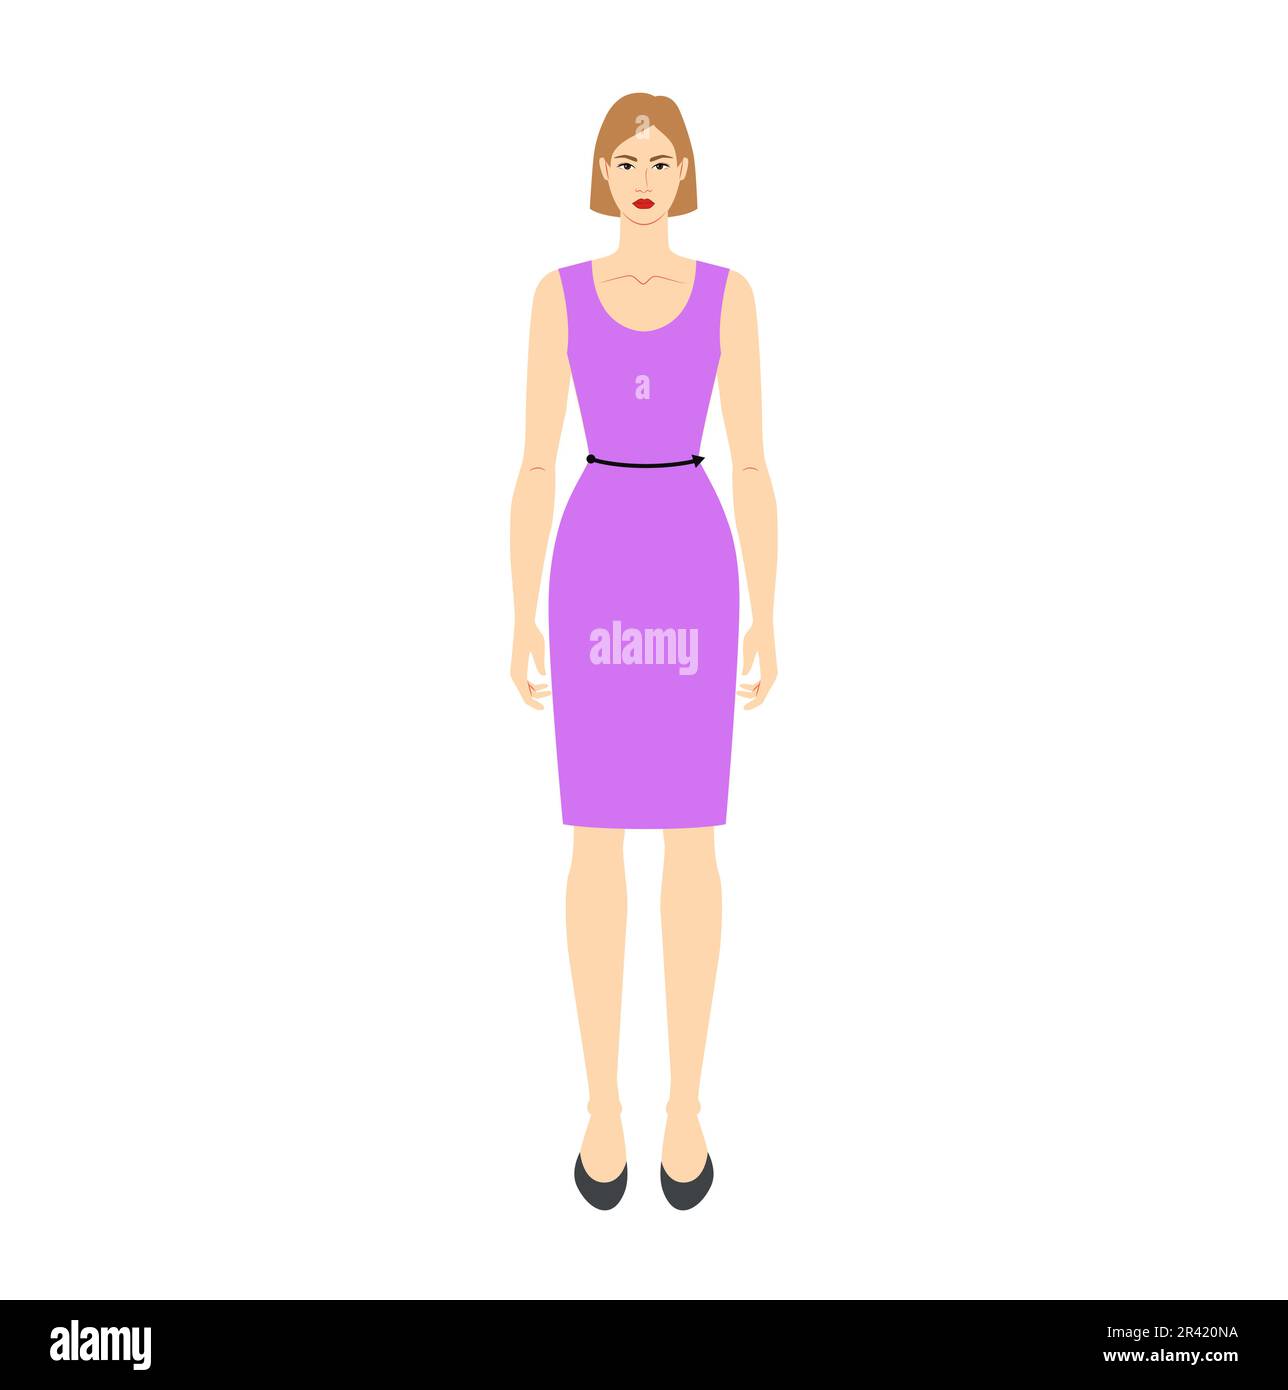 https://c8.alamy.com/comp/2R420NA/women-to-do-waist-measurement-body-with-arrows-fashion-illustration-for-size-chart-flat-female-character-front-8-head-size-girl-in-violet-dress-human-lady-infographic-template-for-clothes-2R420NA.jpg